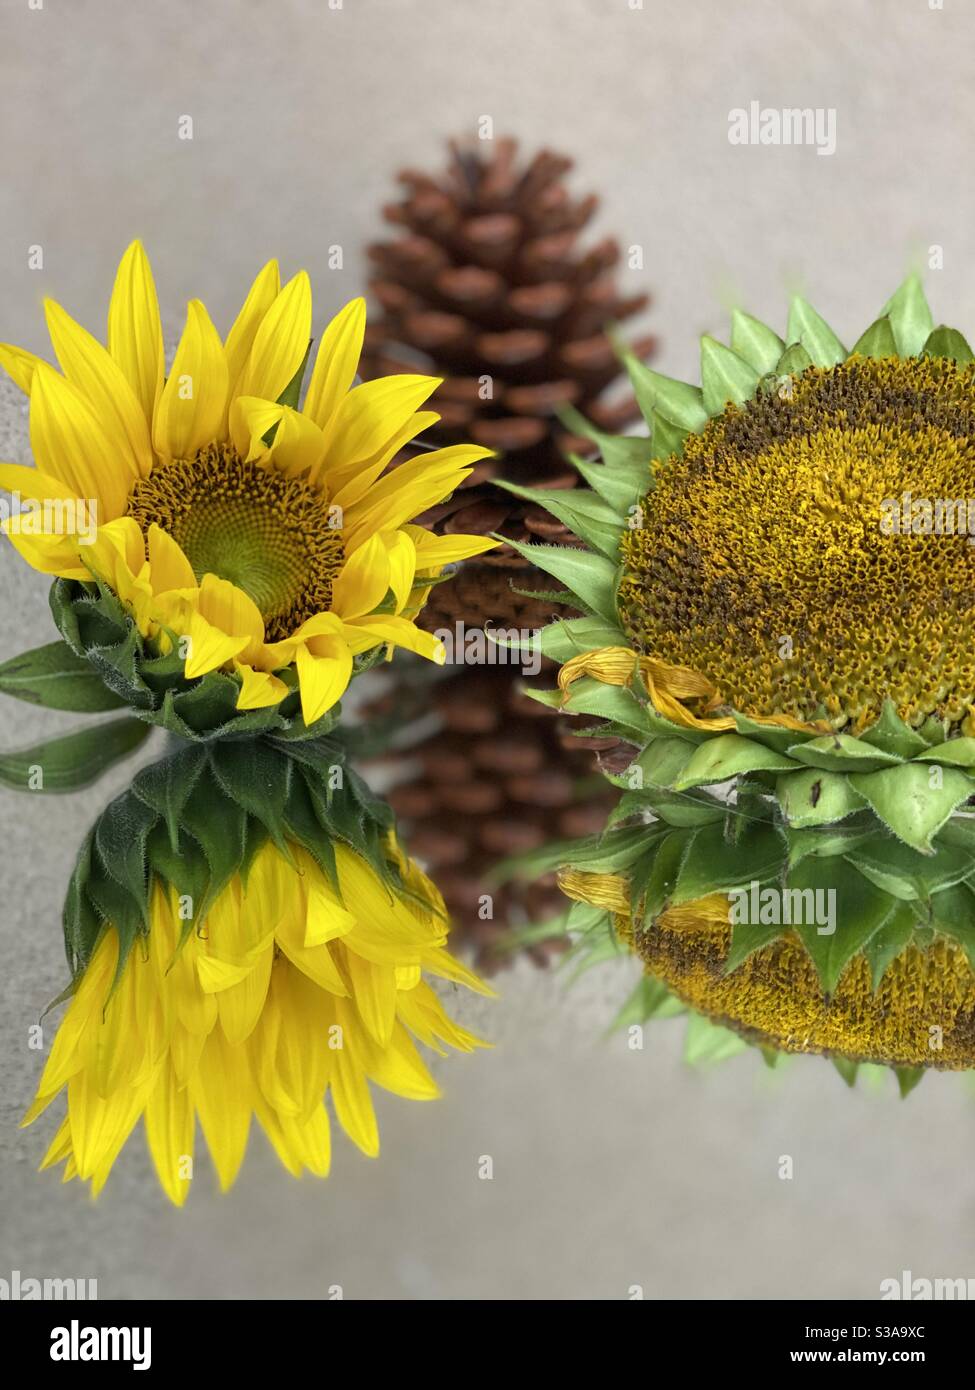 Still life of sunflowers and a pine cone on mirrored surface Stock Photo